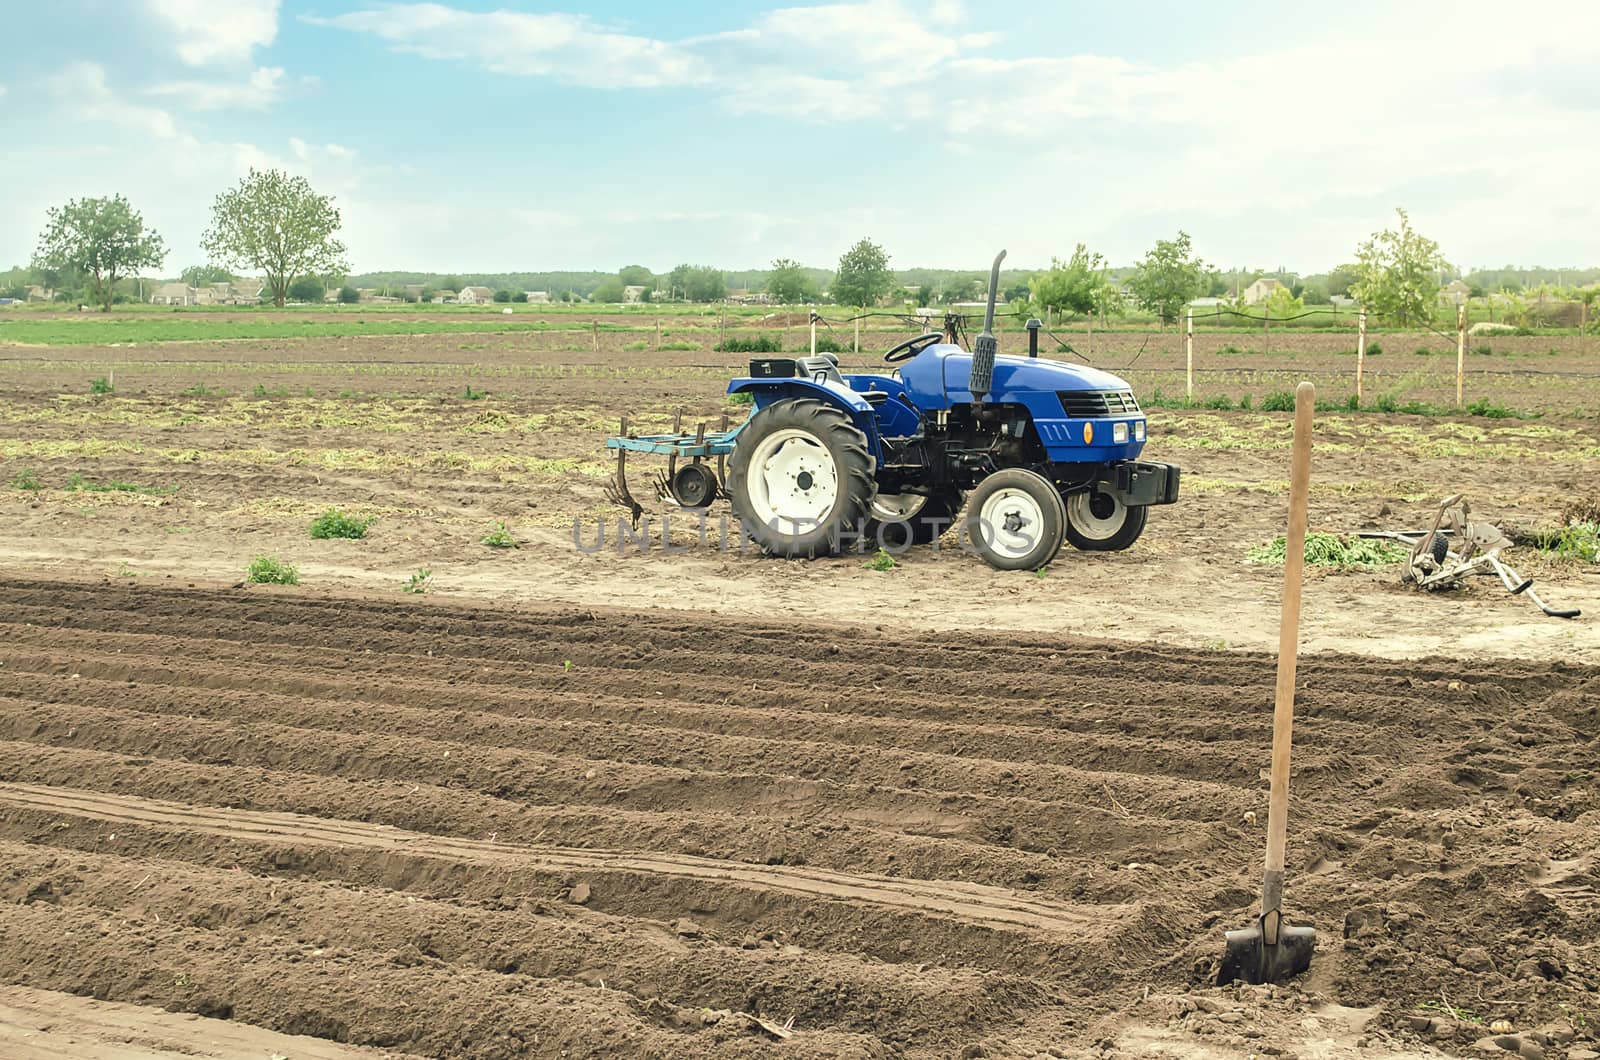 A farm tractor is standing on the field. Preparing the land for planting future crop plants. Cultivation of soil for planting. Agroindustry, agribusiness. Farming, european farmland. Rural countryside